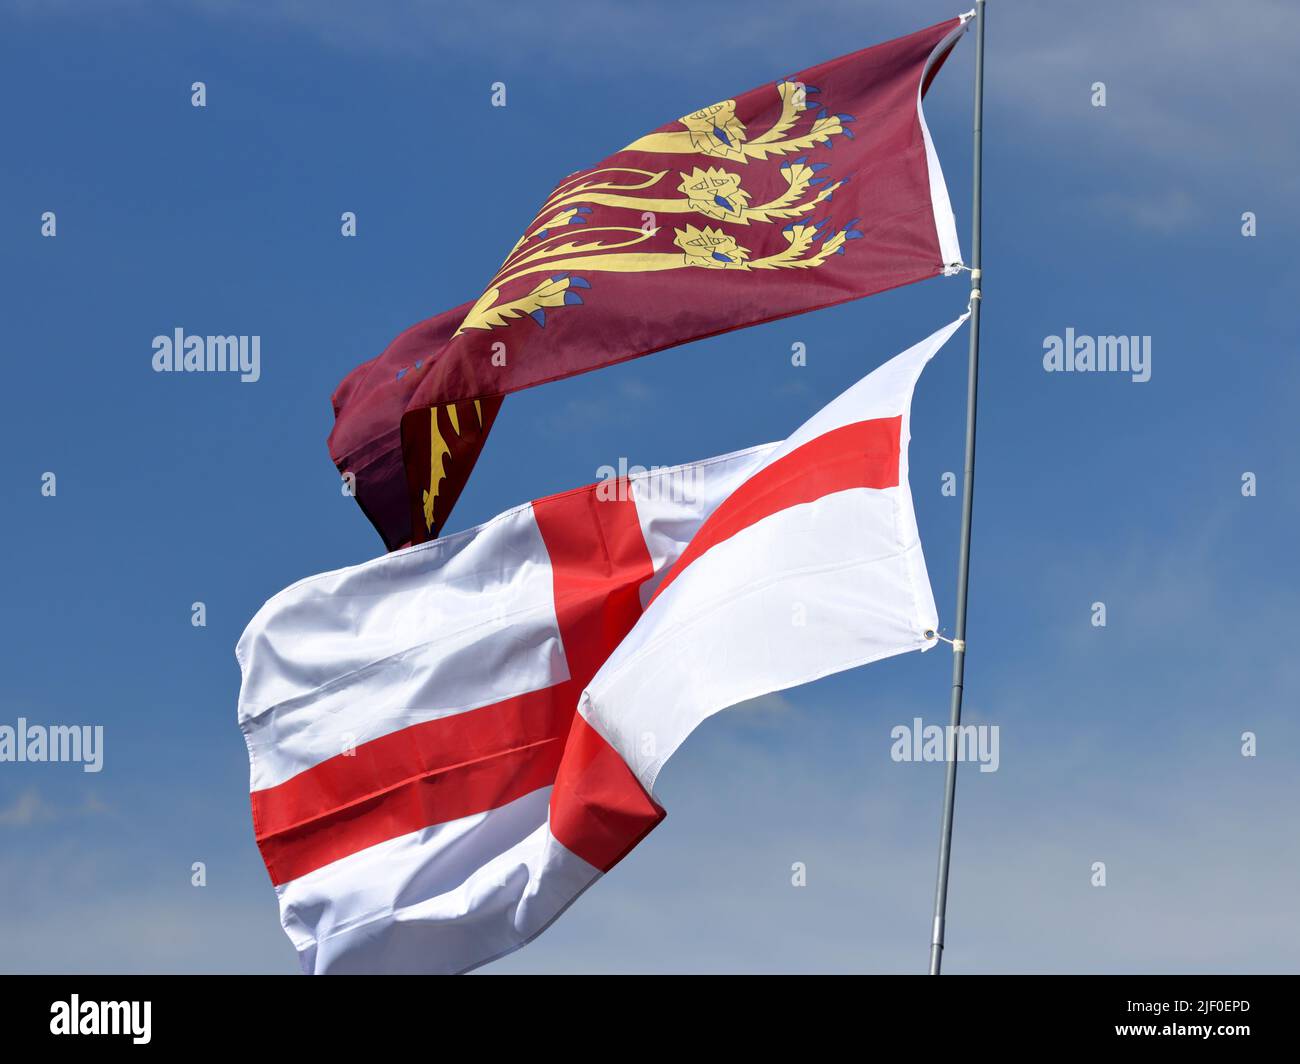 Flags of England: Saint George's Cross and Three gold lions, a Royal Banner of England Stock Photo